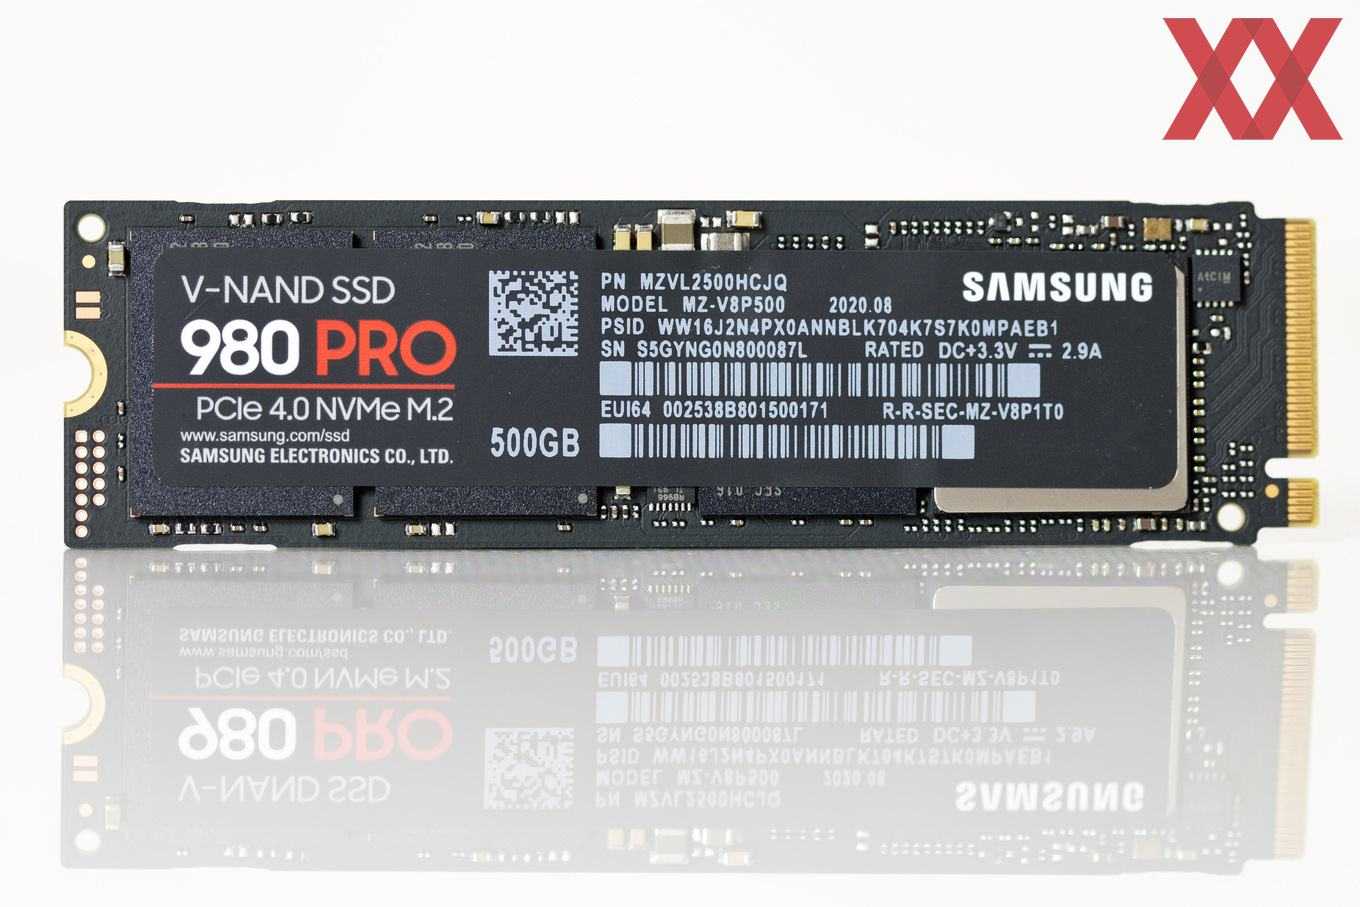 Samsung 980 pro m.2 nvme ssd review: redefining gen4 performance (updated)